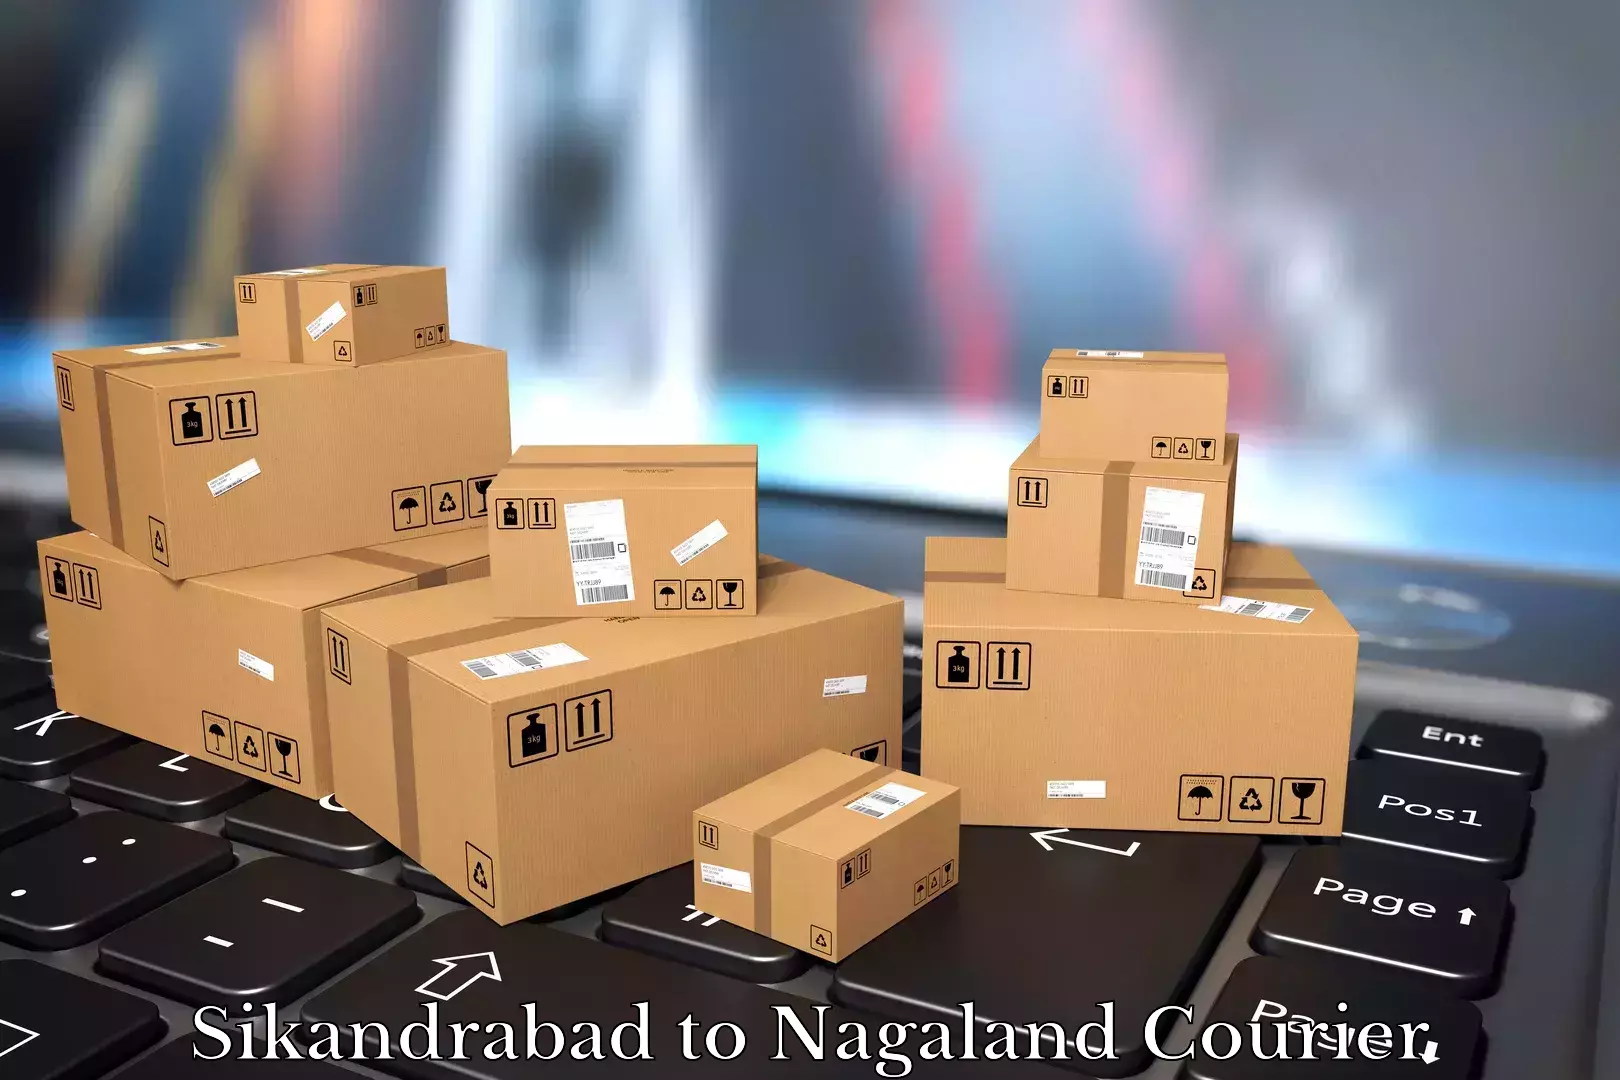 Furniture relocation experts Sikandrabad to Nagaland